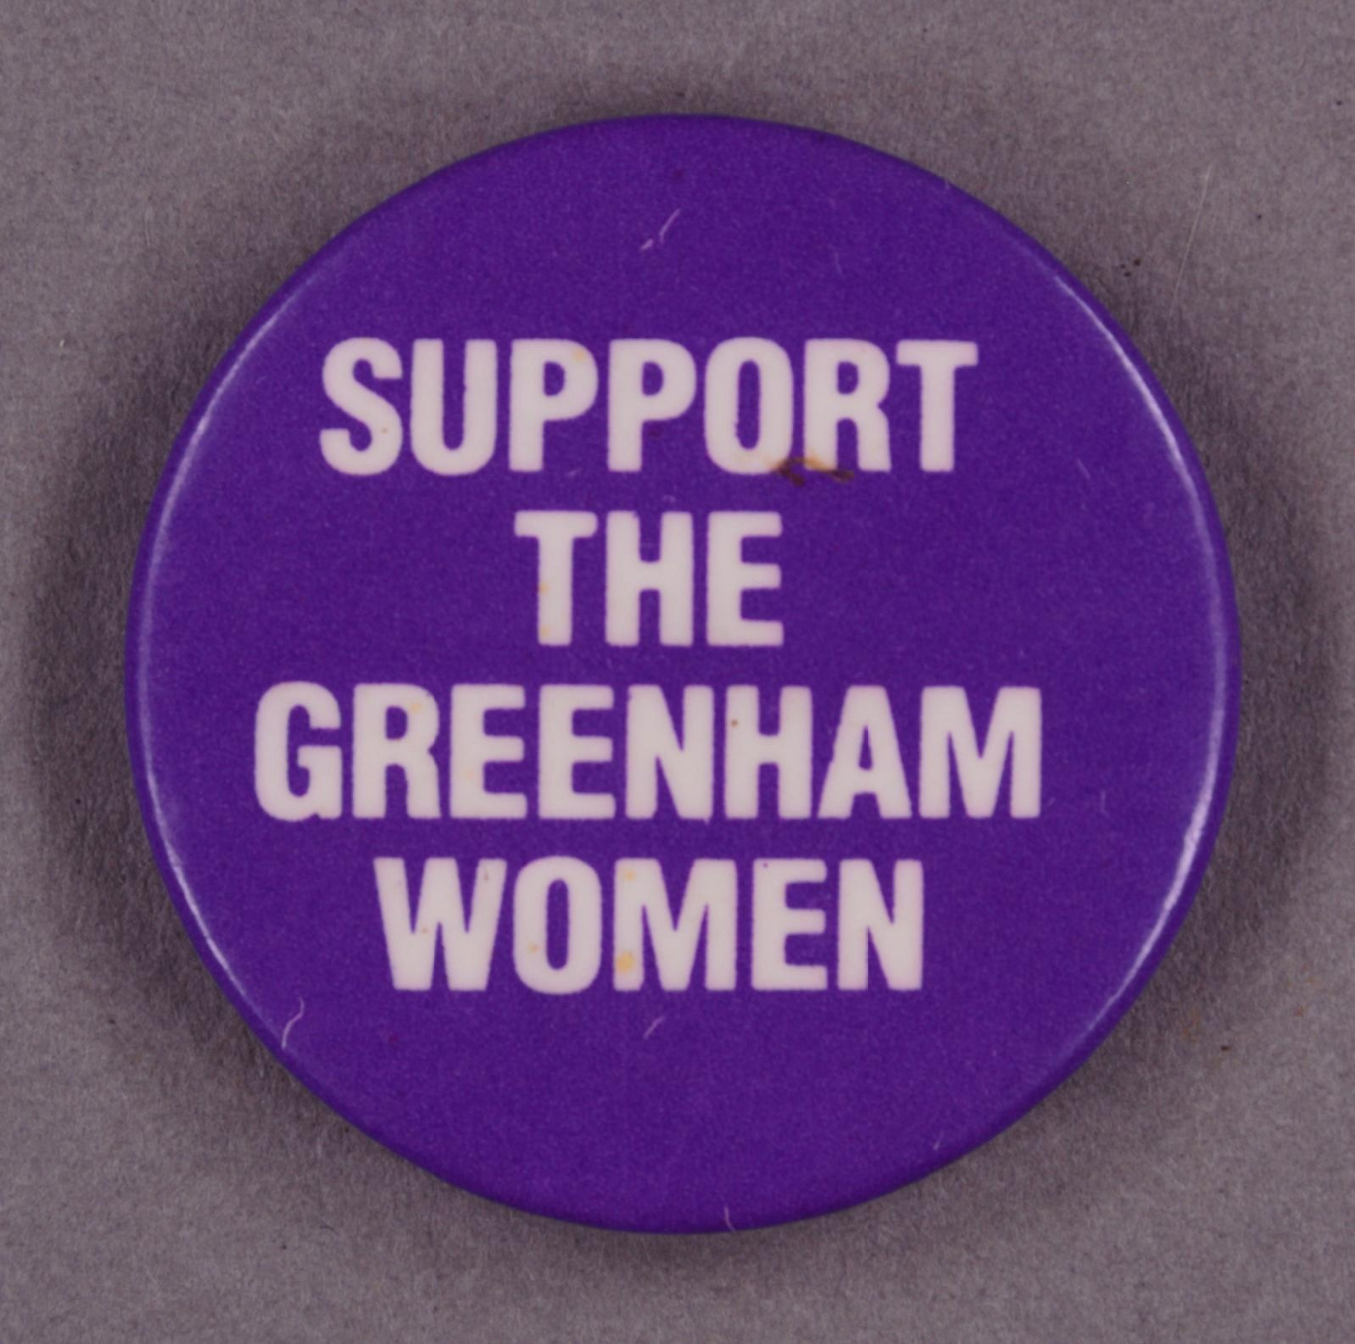 Digital image of a purple badge with white text saying: "Support The Greenham Women"